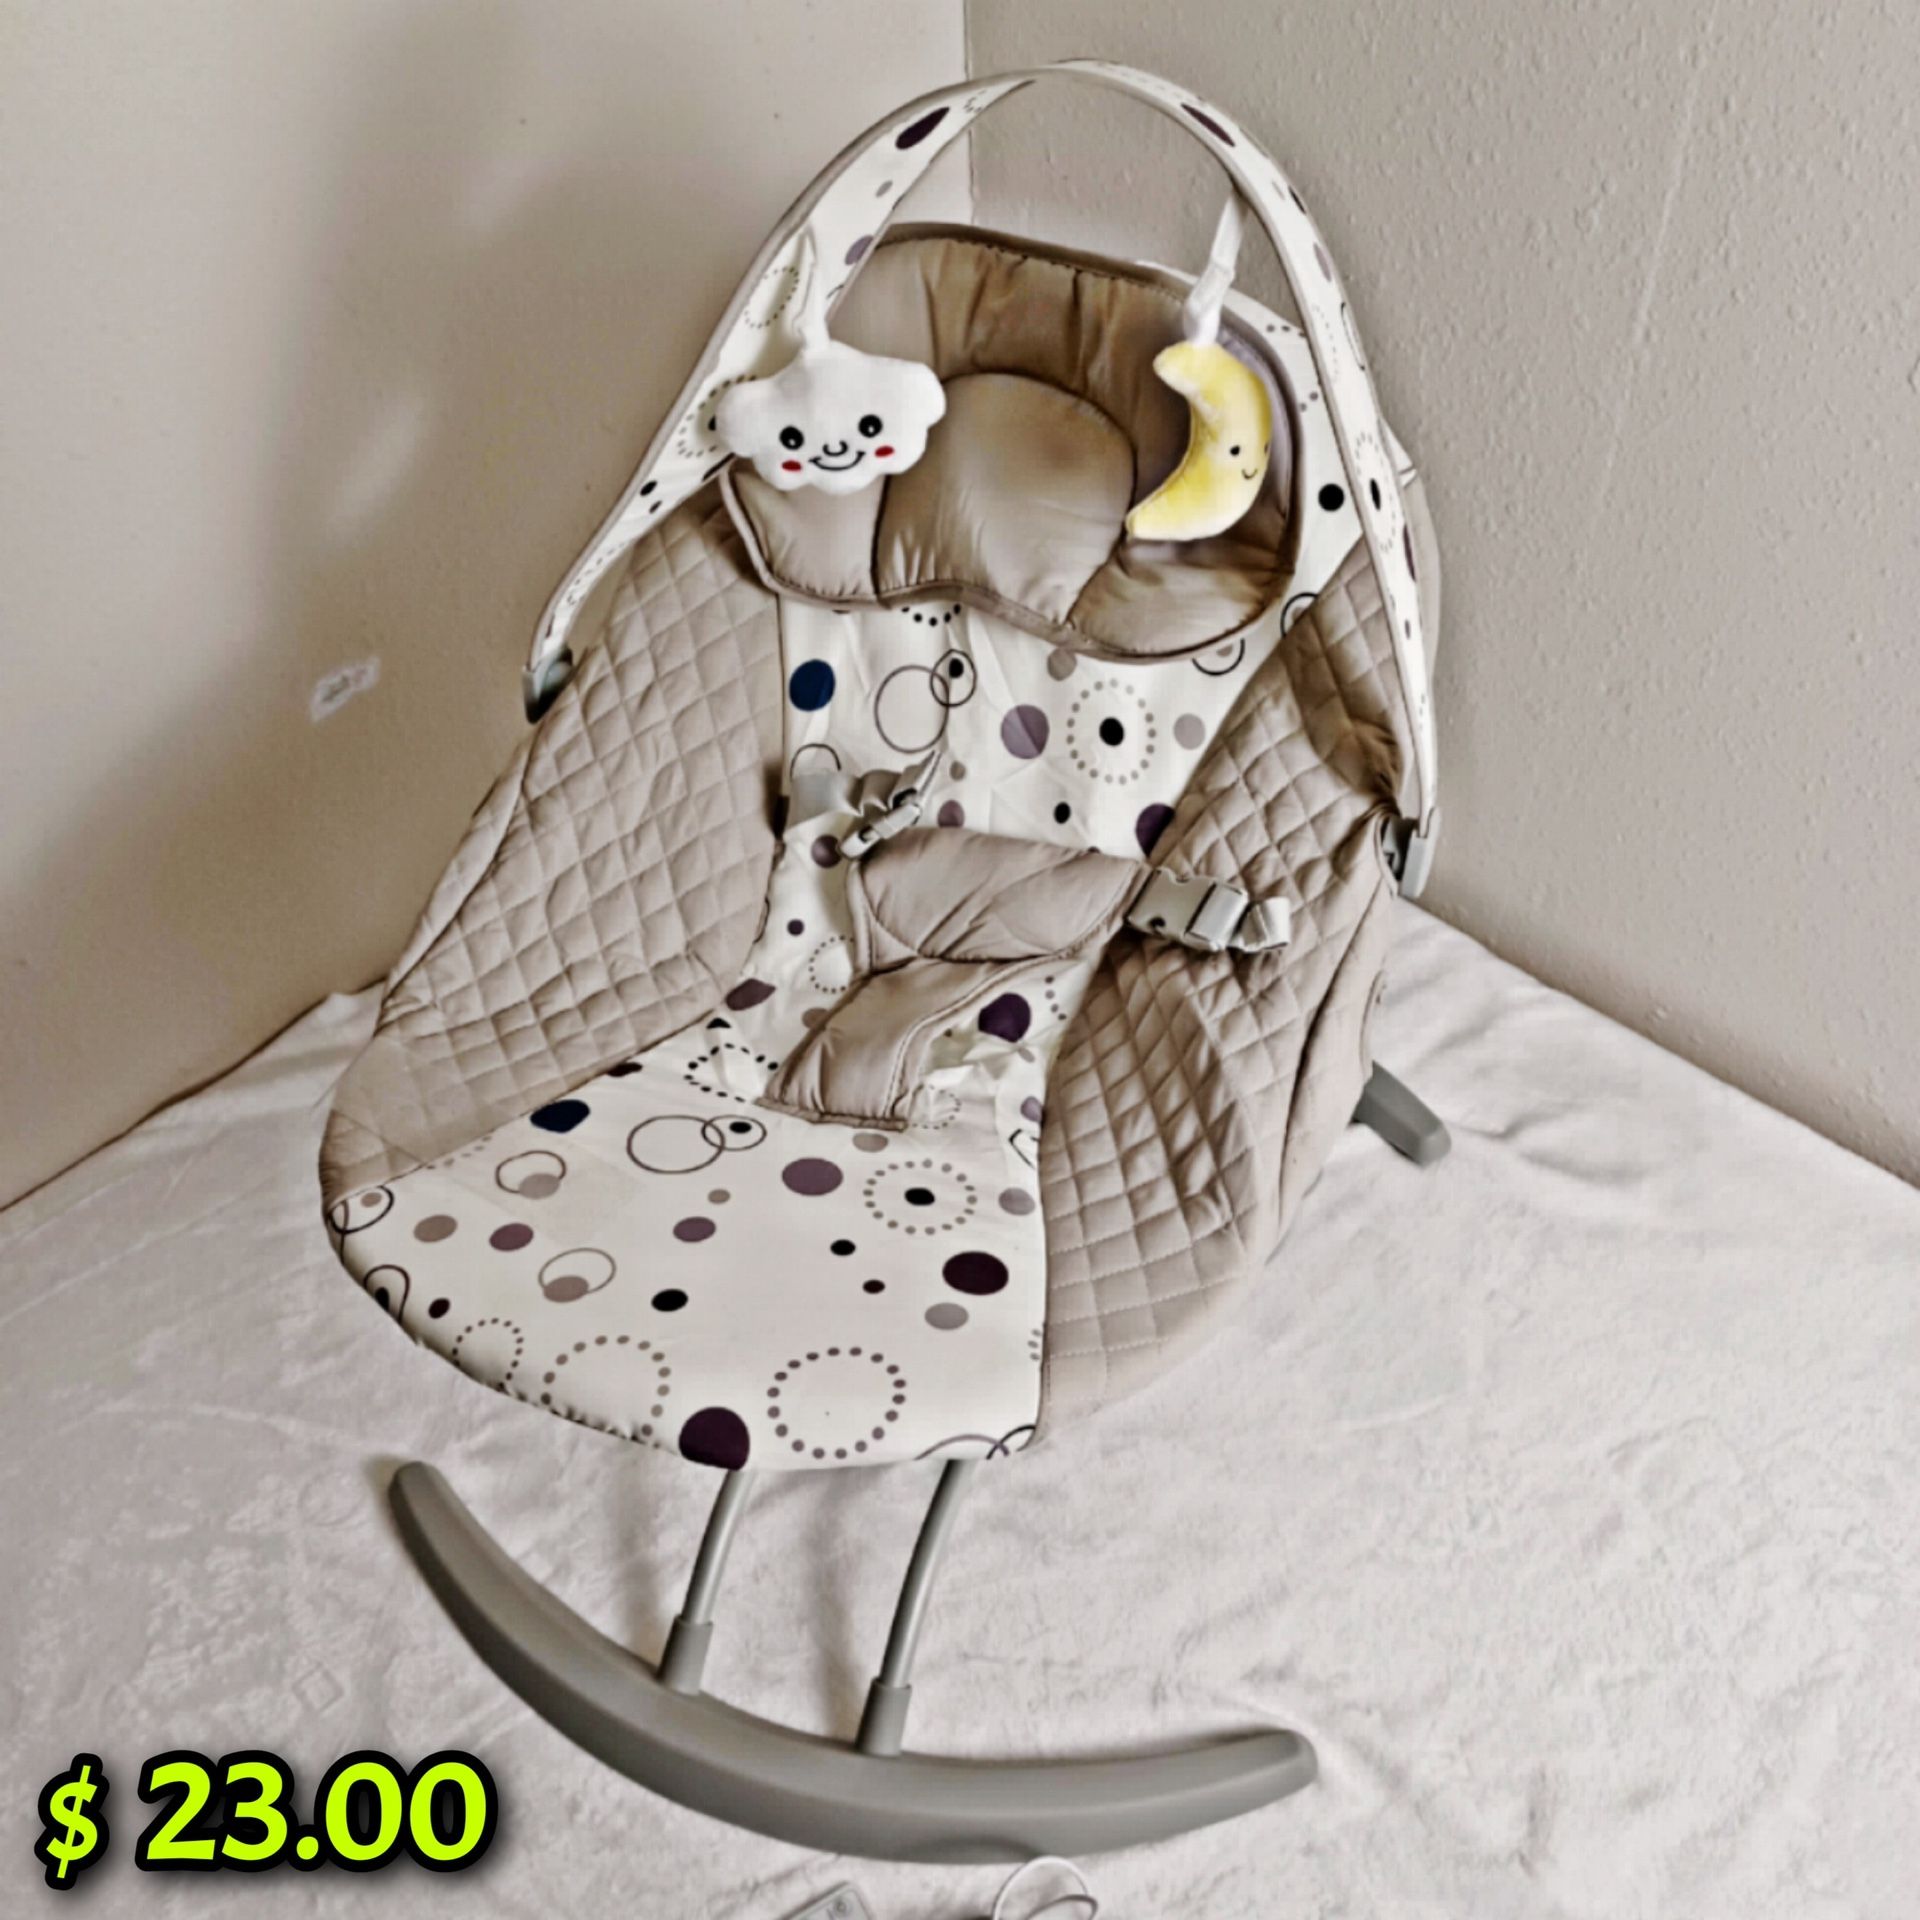 Kmair Electric Baby Swing 